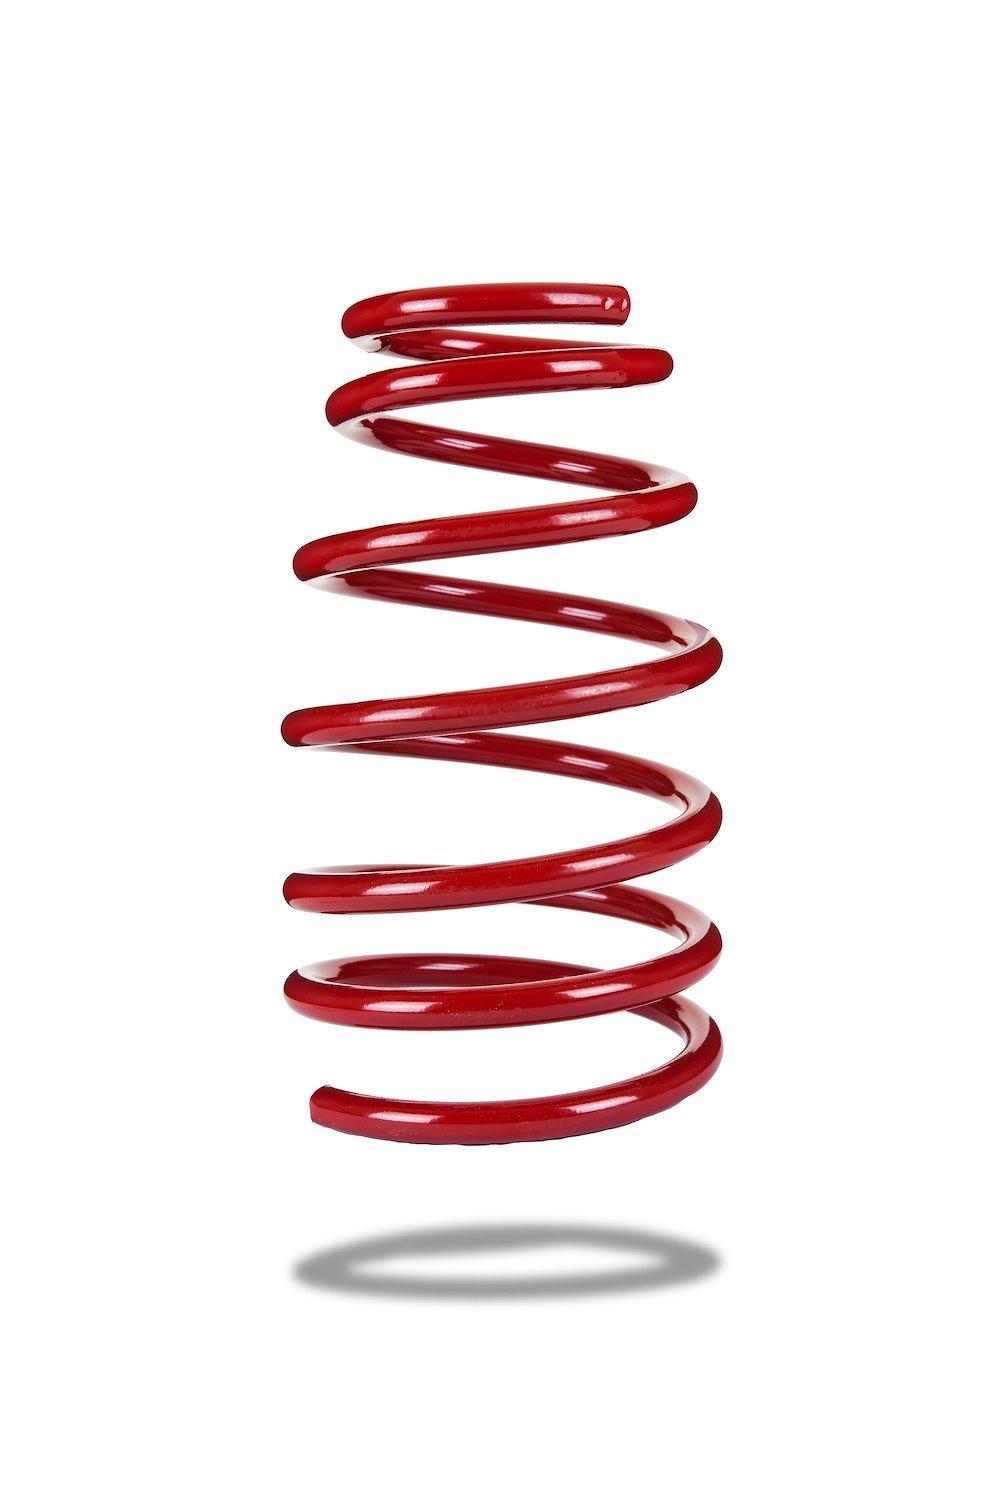 PED-220008 Coil Spring, Front, Ford Mustang S197, Low